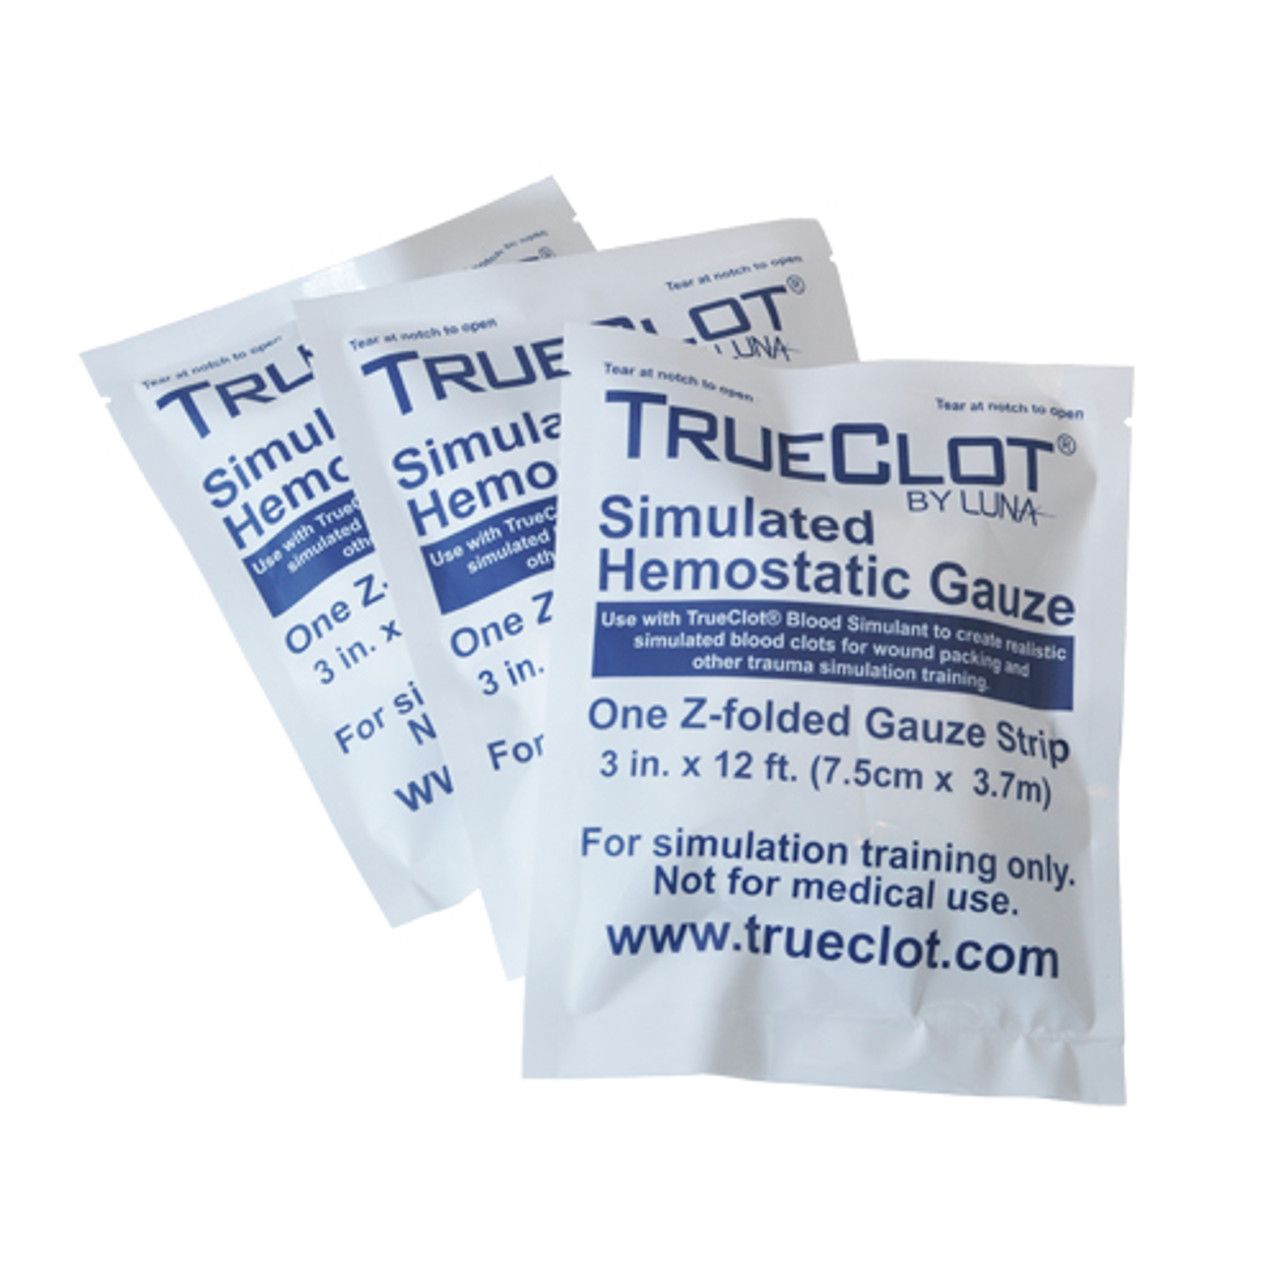 TrueClot Simulated Hemostatic Gauze 3-pack showing packaging up close